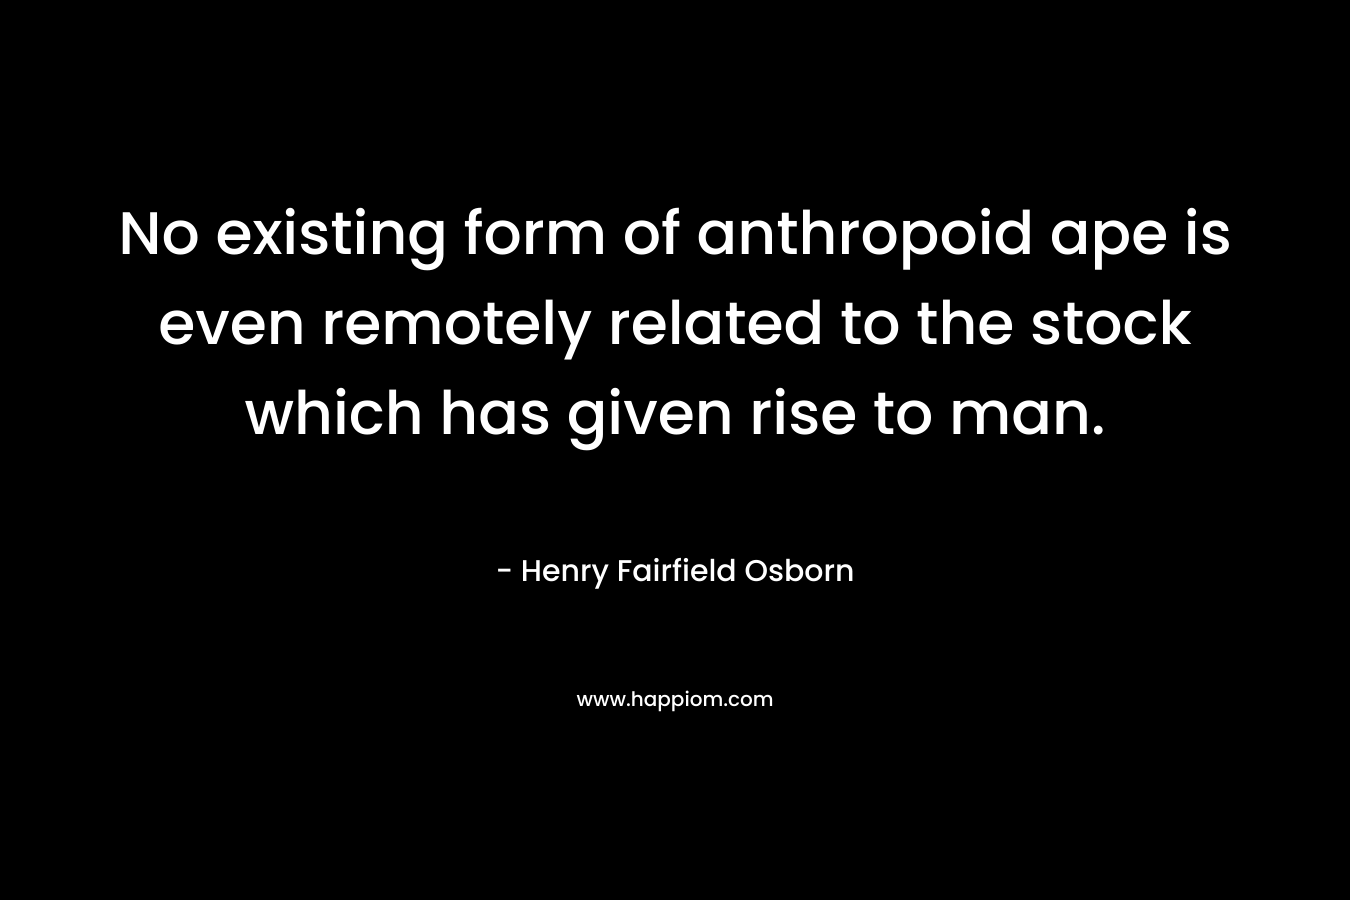 No existing form of anthropoid ape is even remotely related to the stock which has given rise to man. – Henry Fairfield Osborn